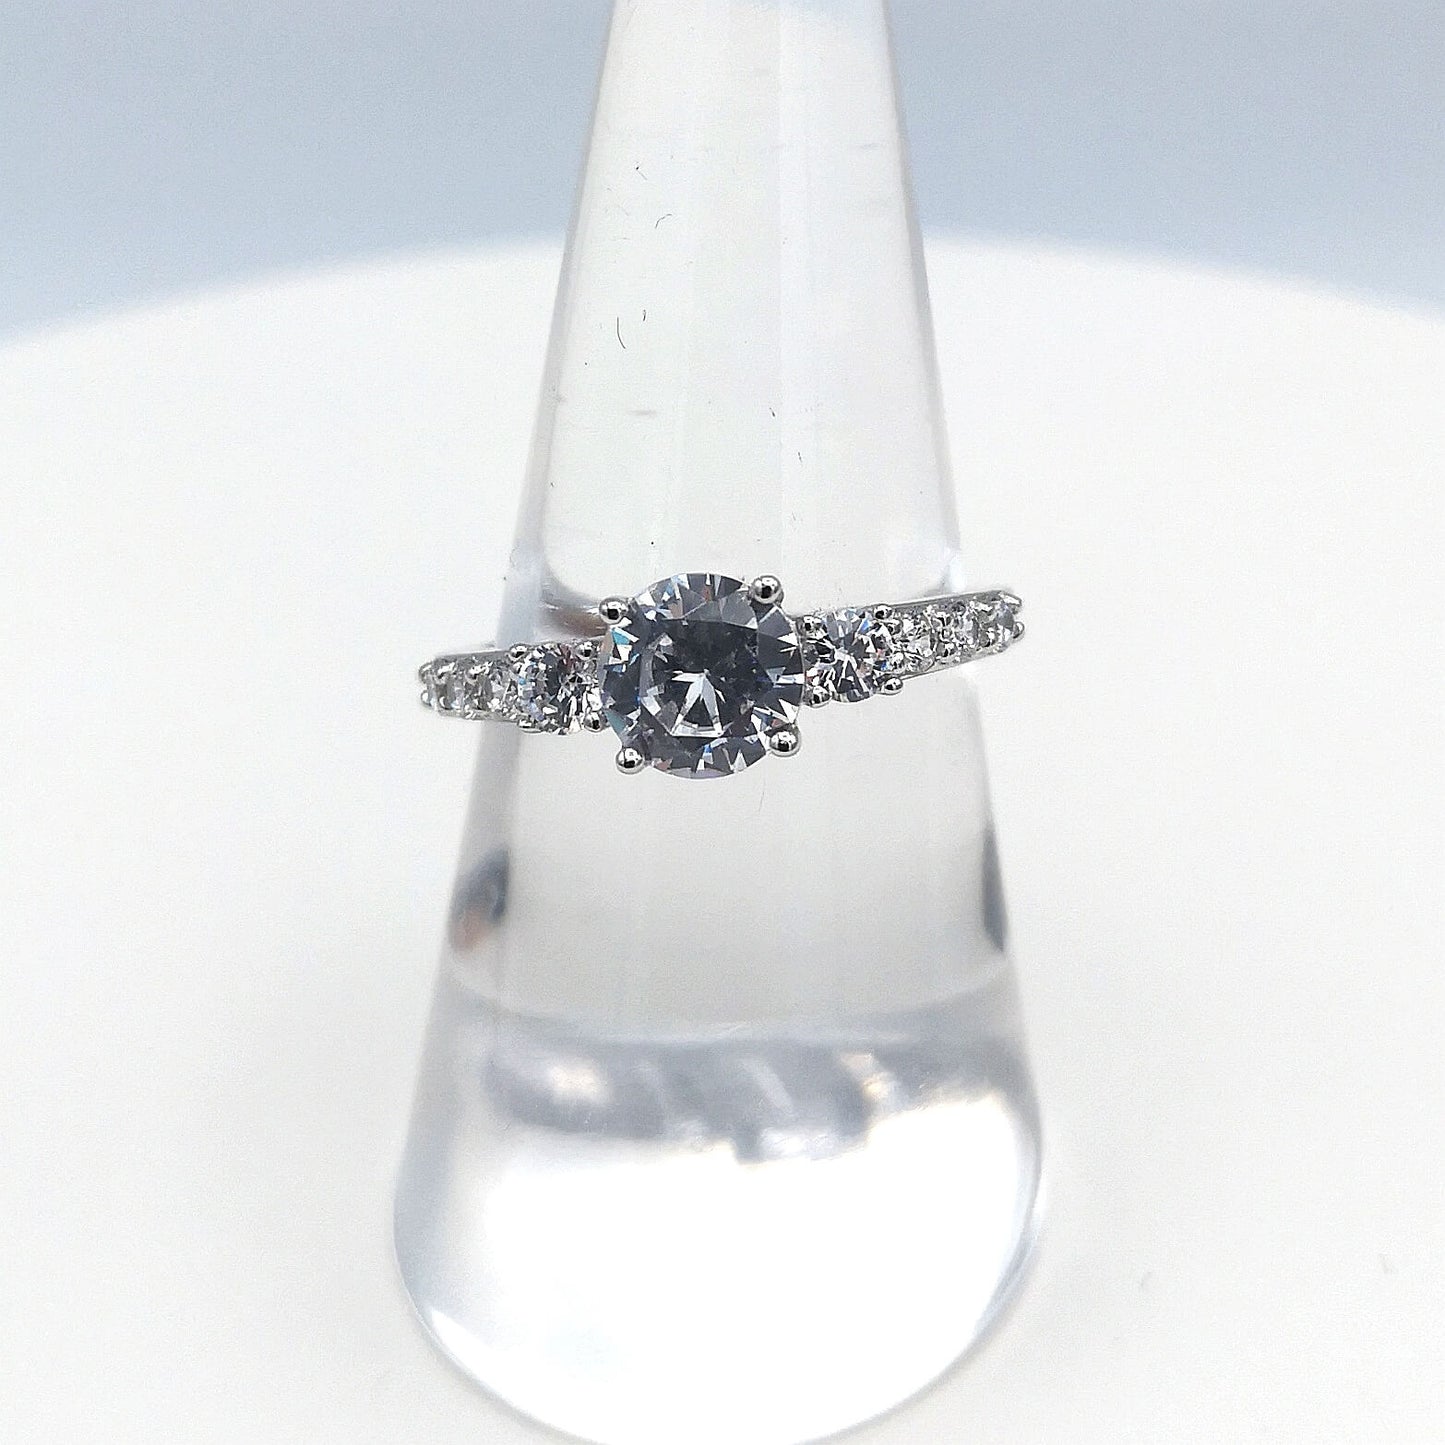 Sterling Silver 3 Stone Round Cut CZ Ring